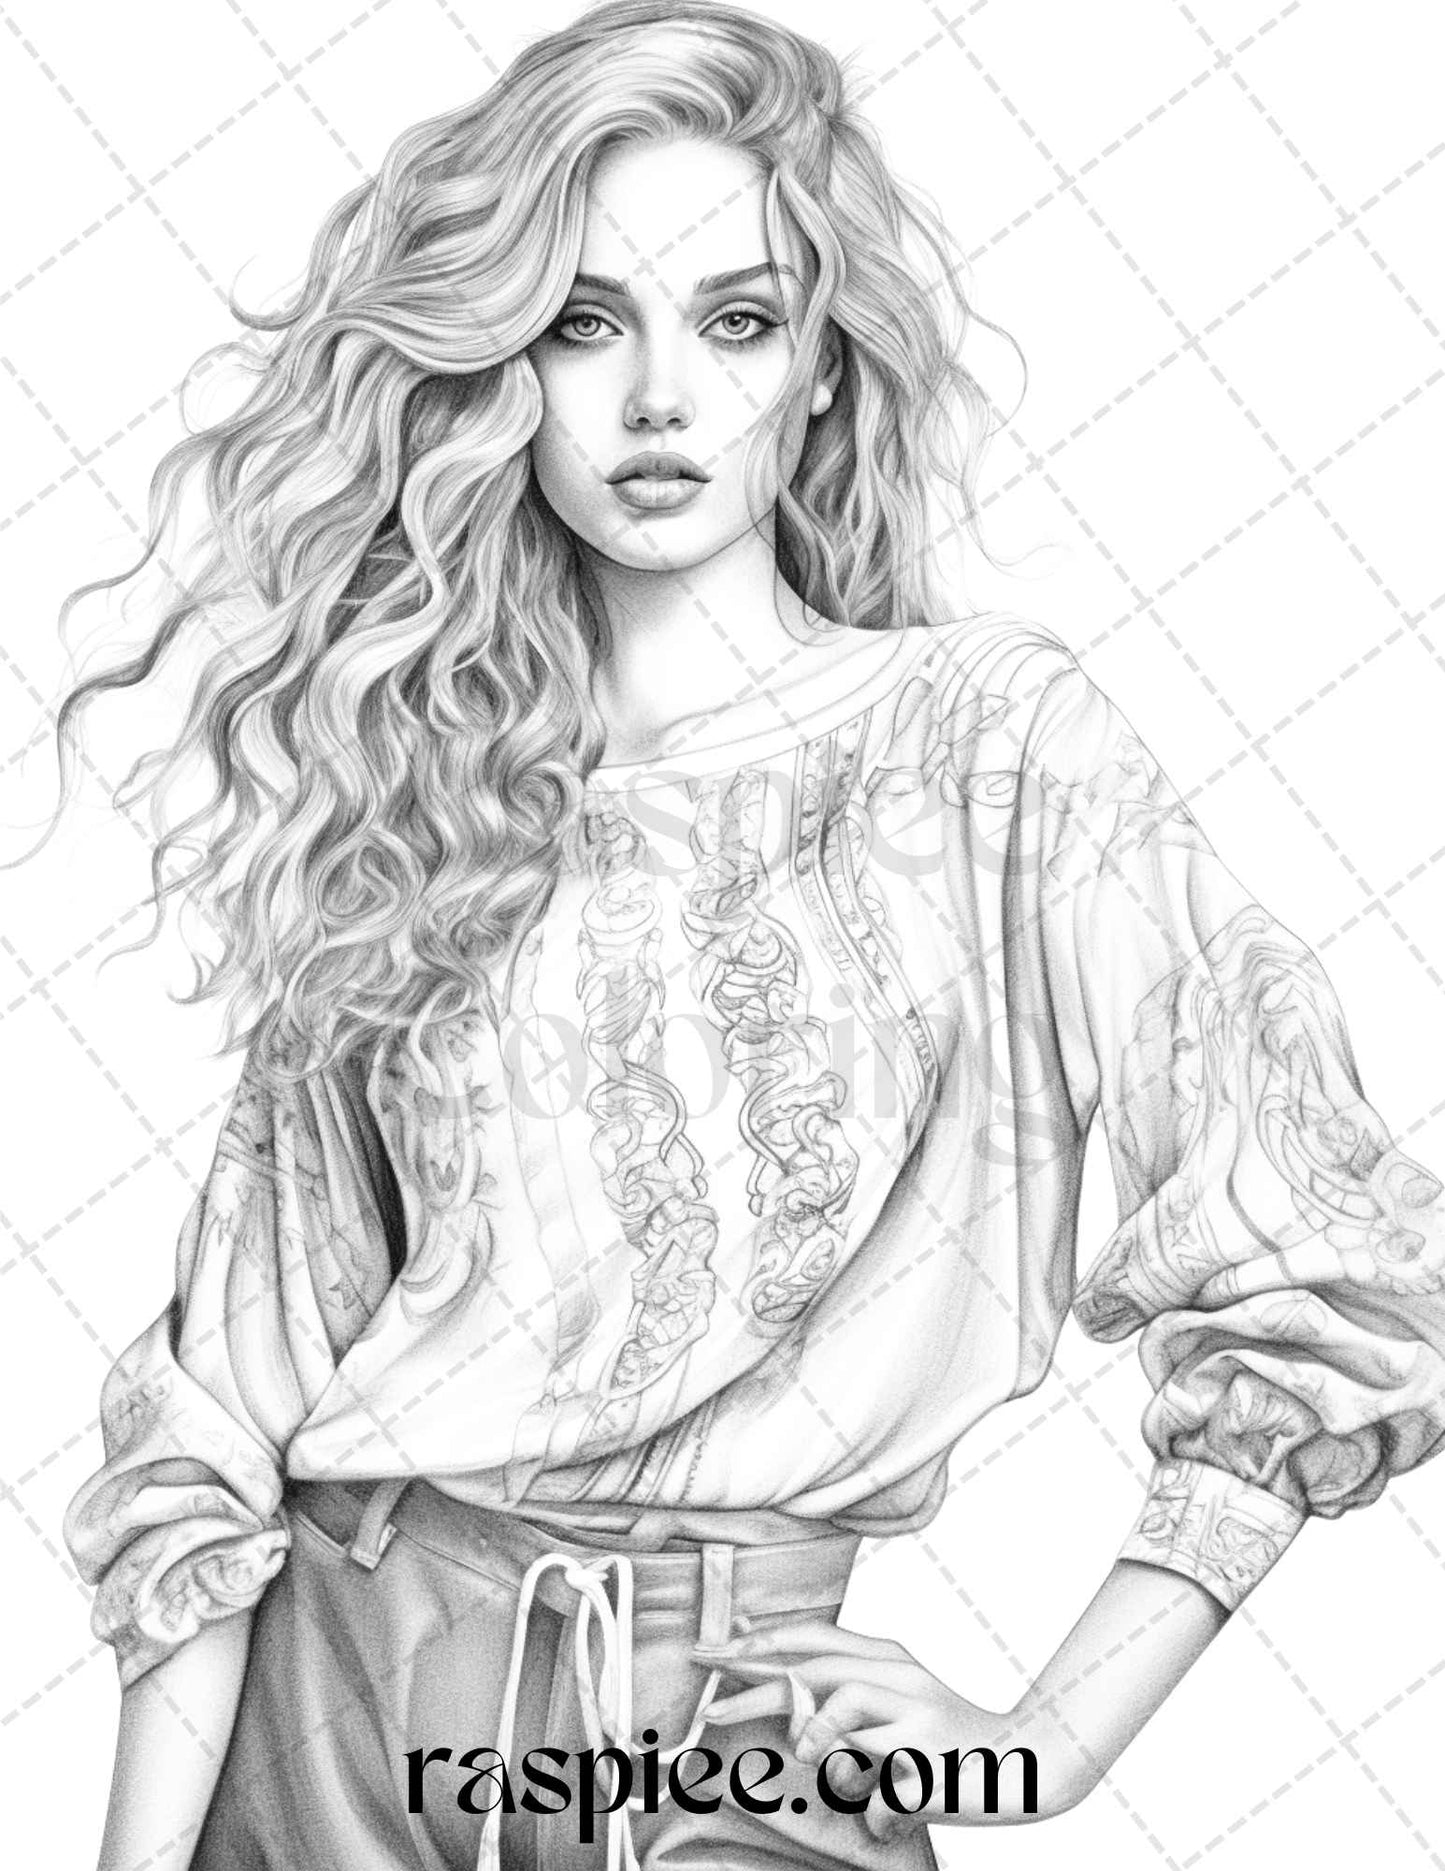 Streetwear fashion grayscale coloring page, Printable adult coloring page, Trendy urban style grayscale art, Fashion illustration coloring printable, Grayscale fashion coloring for adults